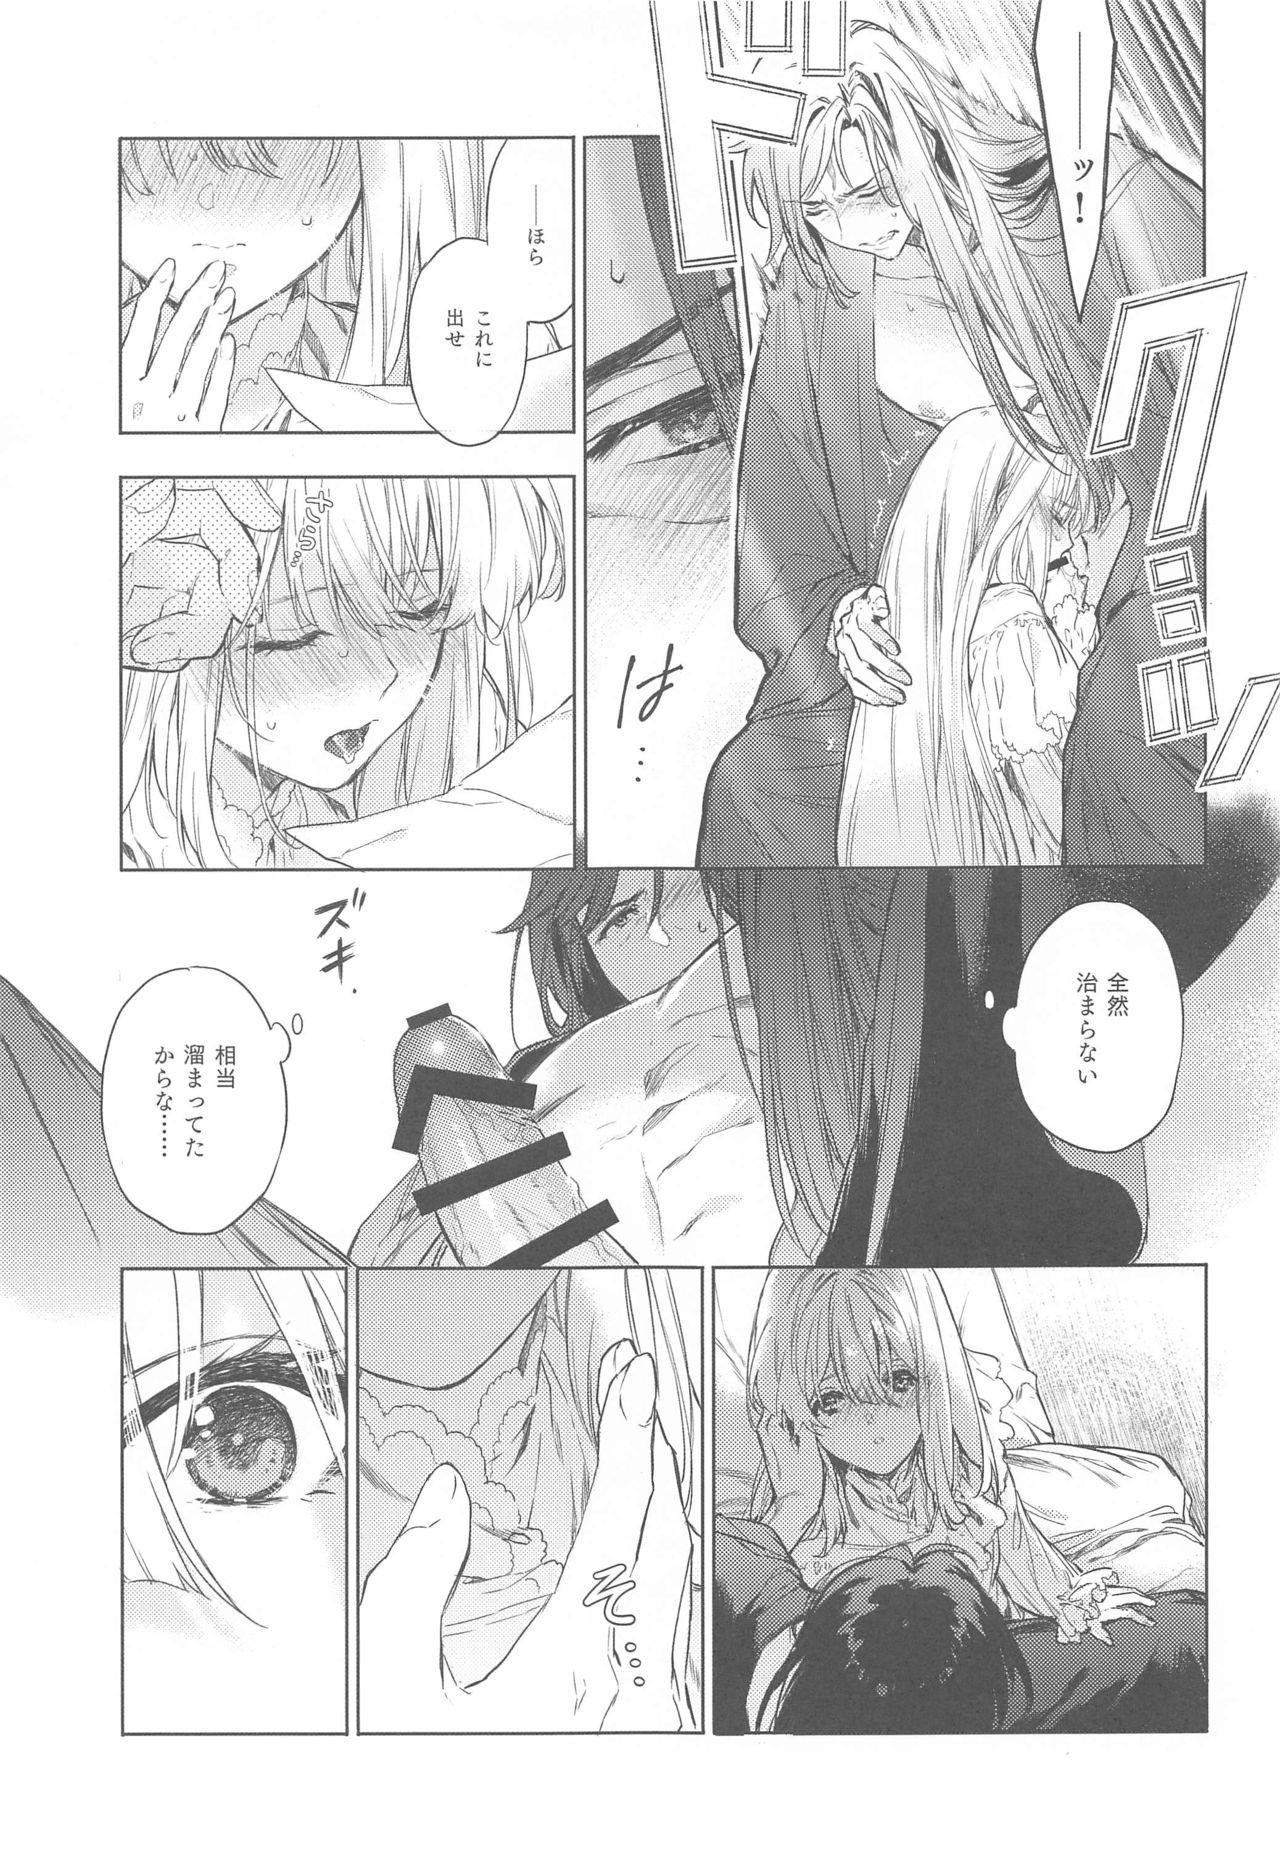 Hardcore Free Porn Scars of love - Violet evergarden Spreading - Page 8